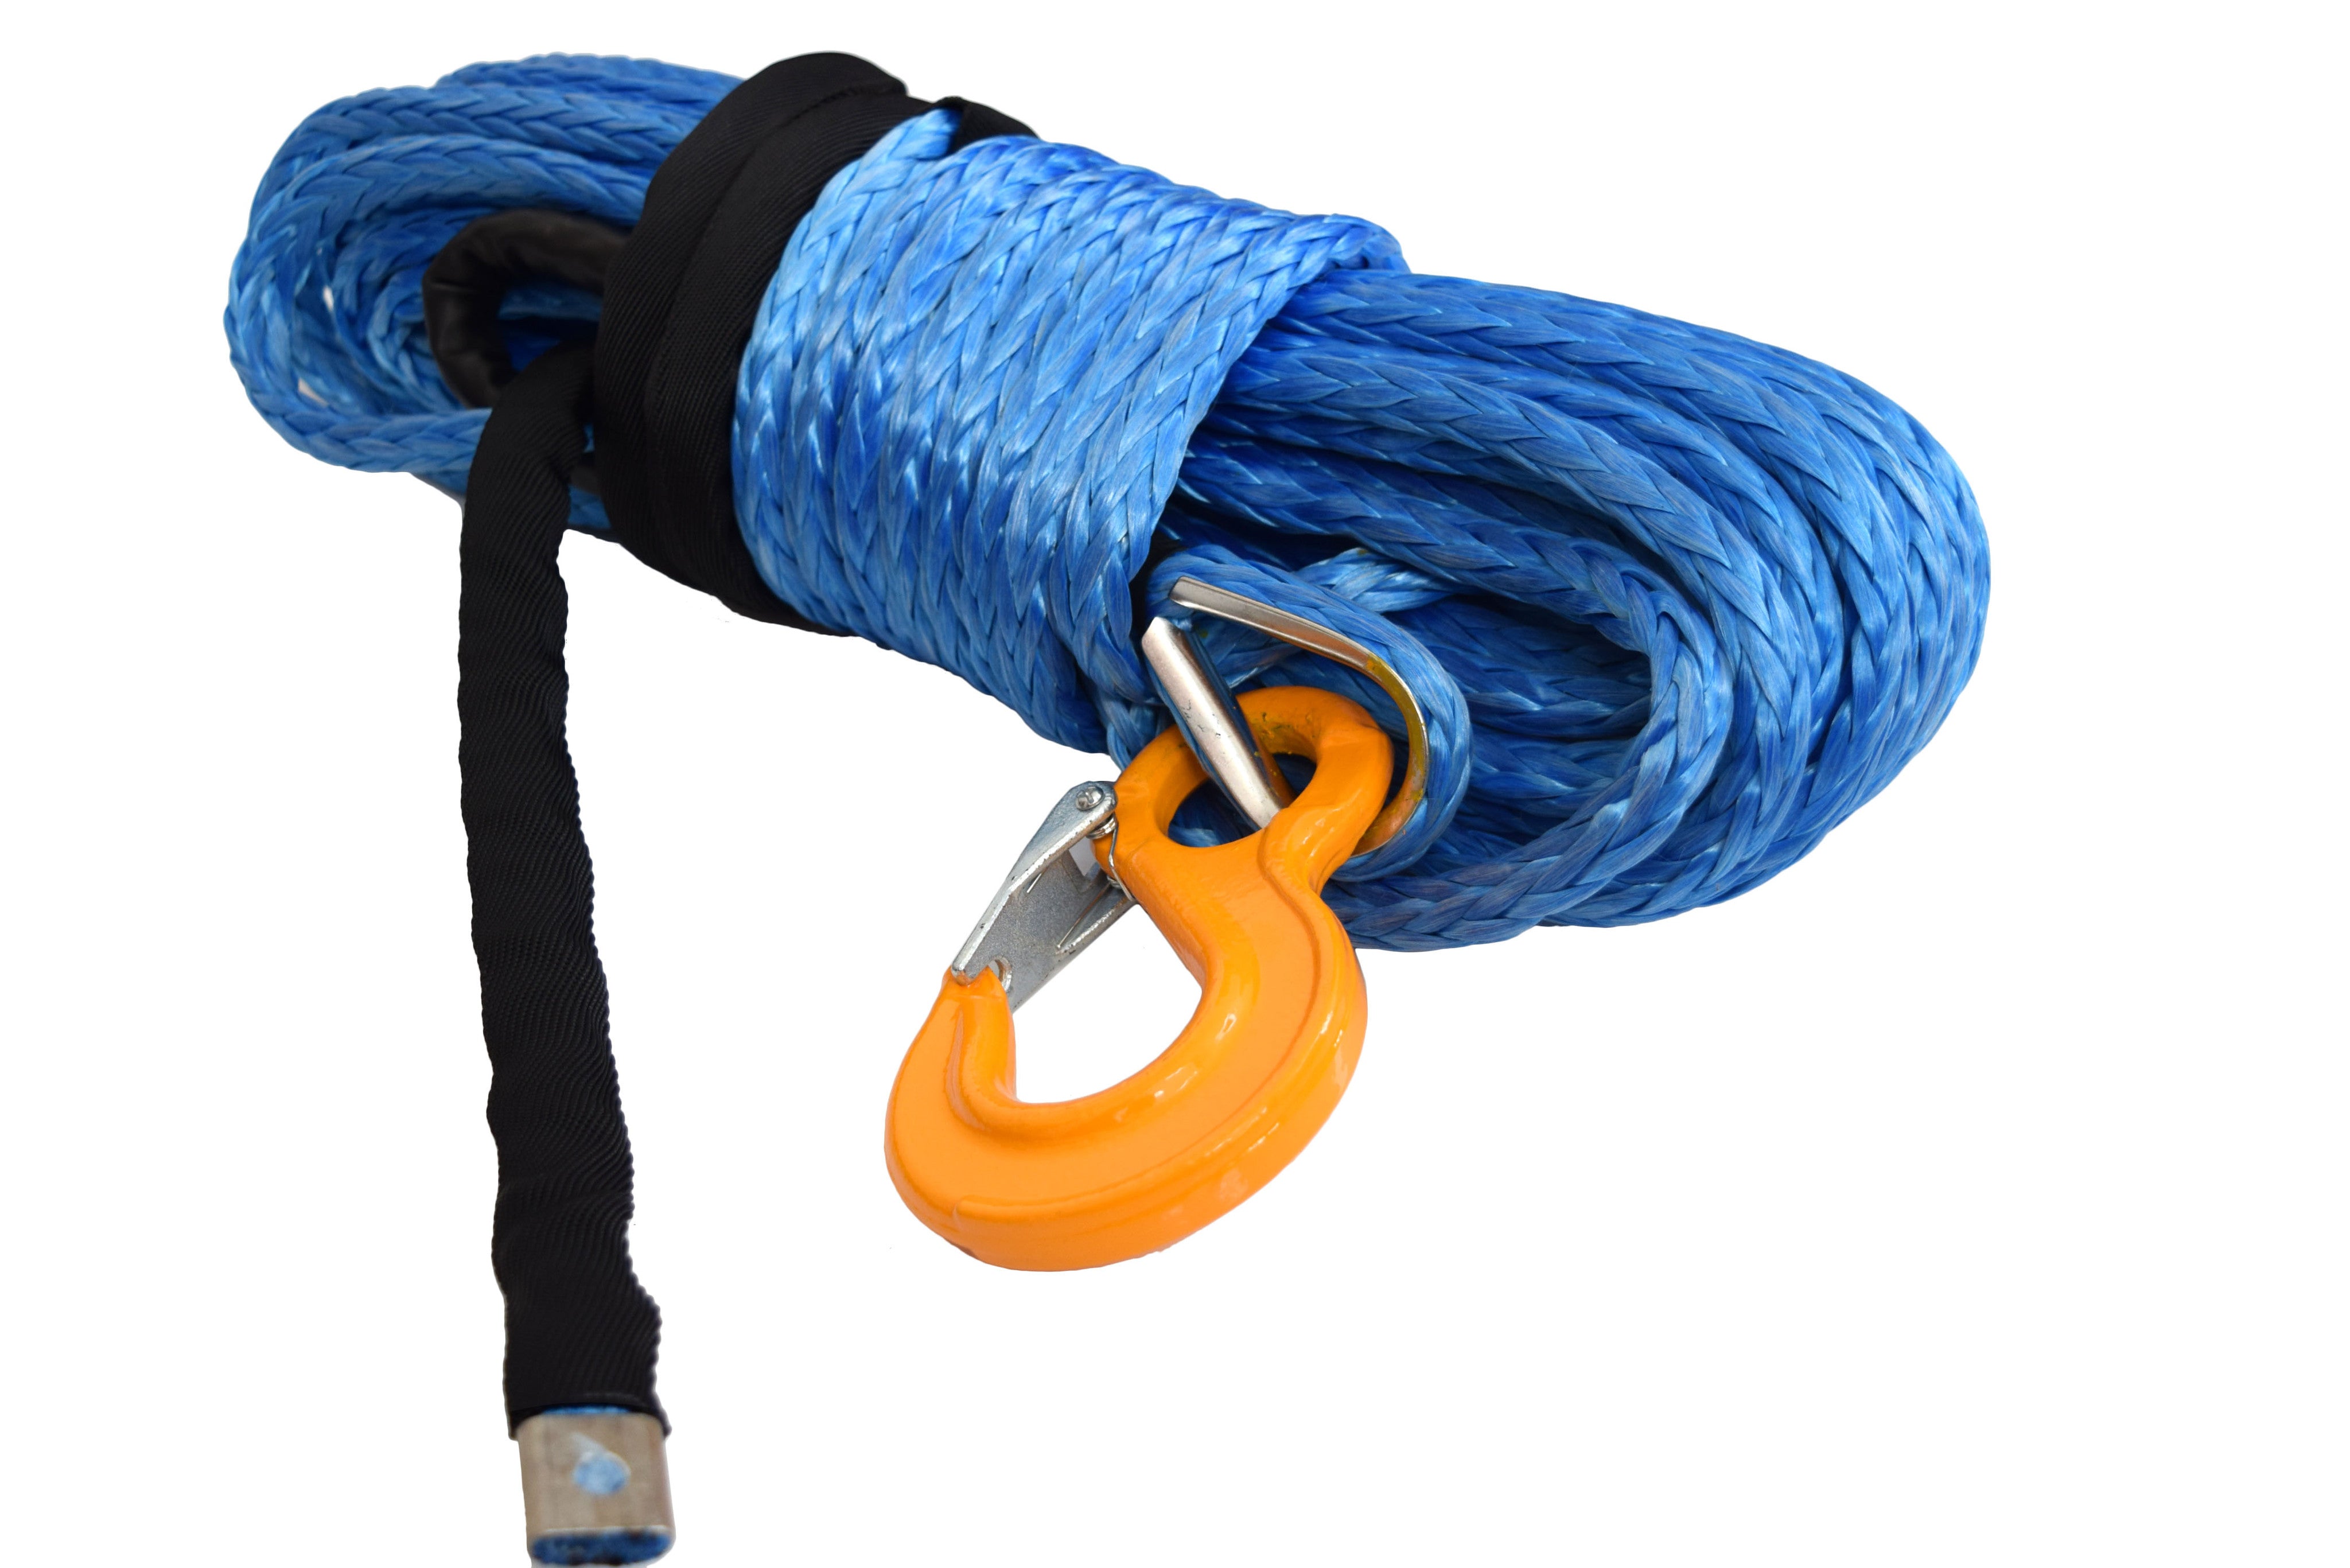 QIQU blue 100 ft 1/2 inch SUV Off-road car synthetic winch cable rope line with hook and lug